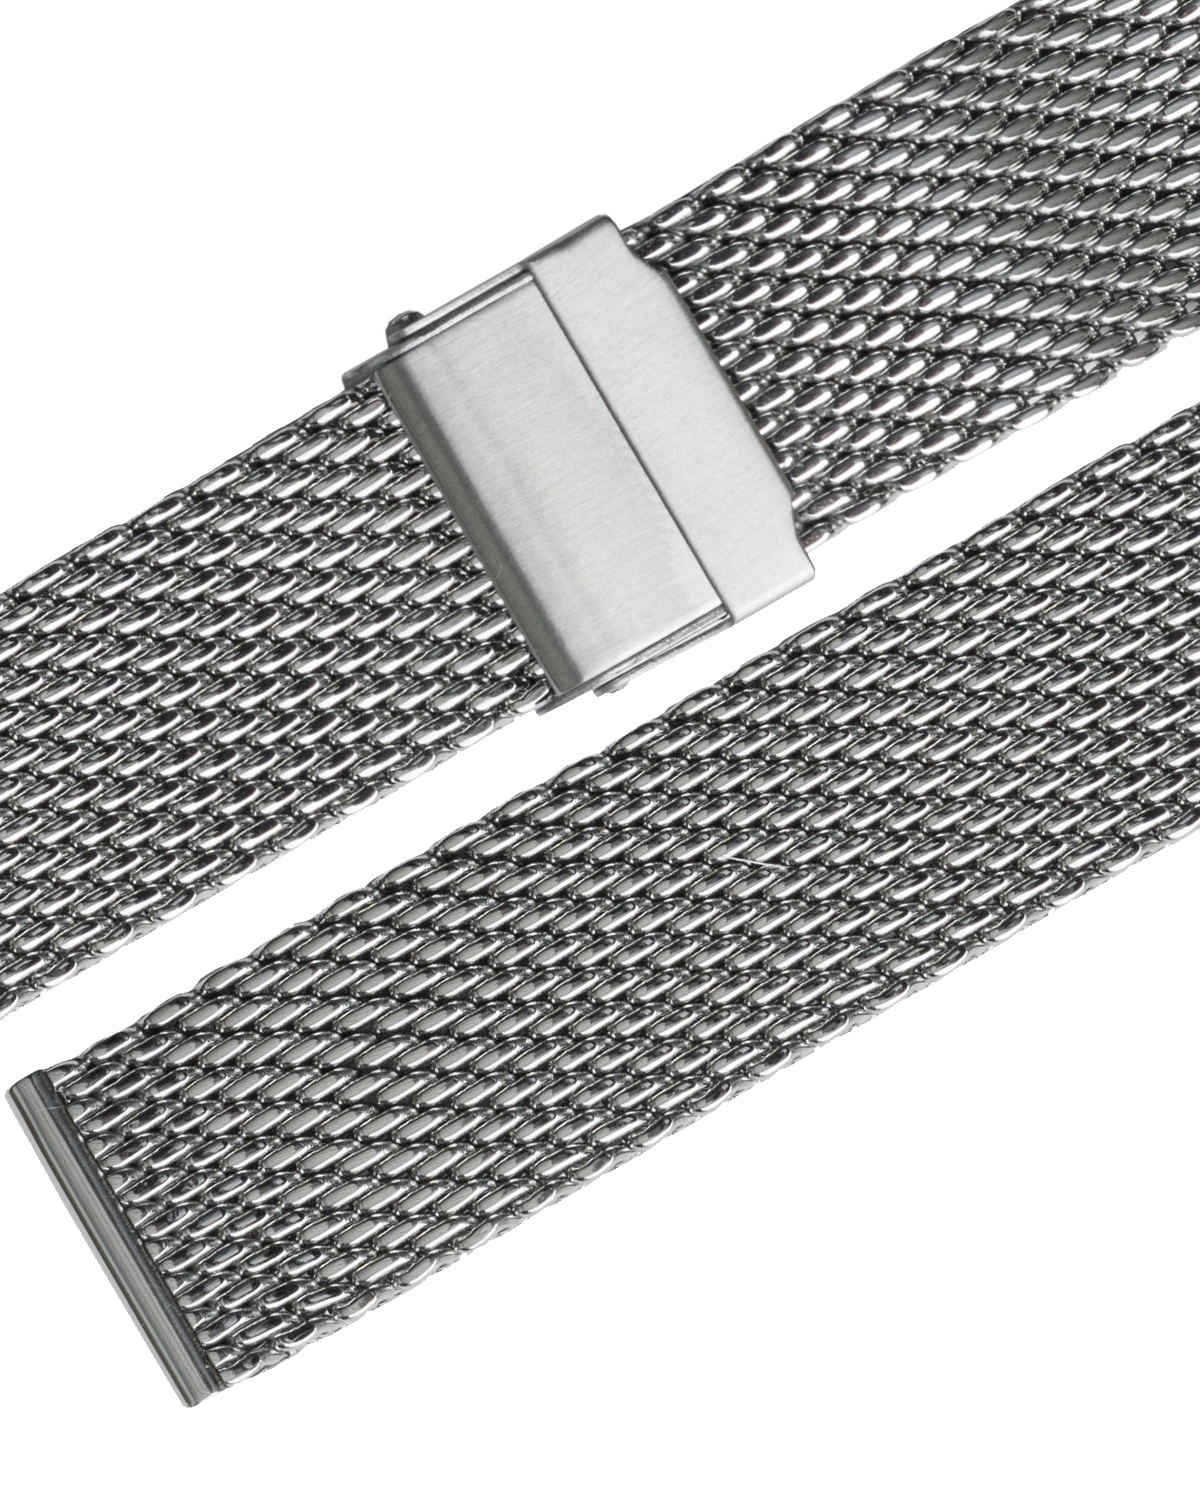 70-78066 Stalux Milanaise mesh 20mm stainless steel